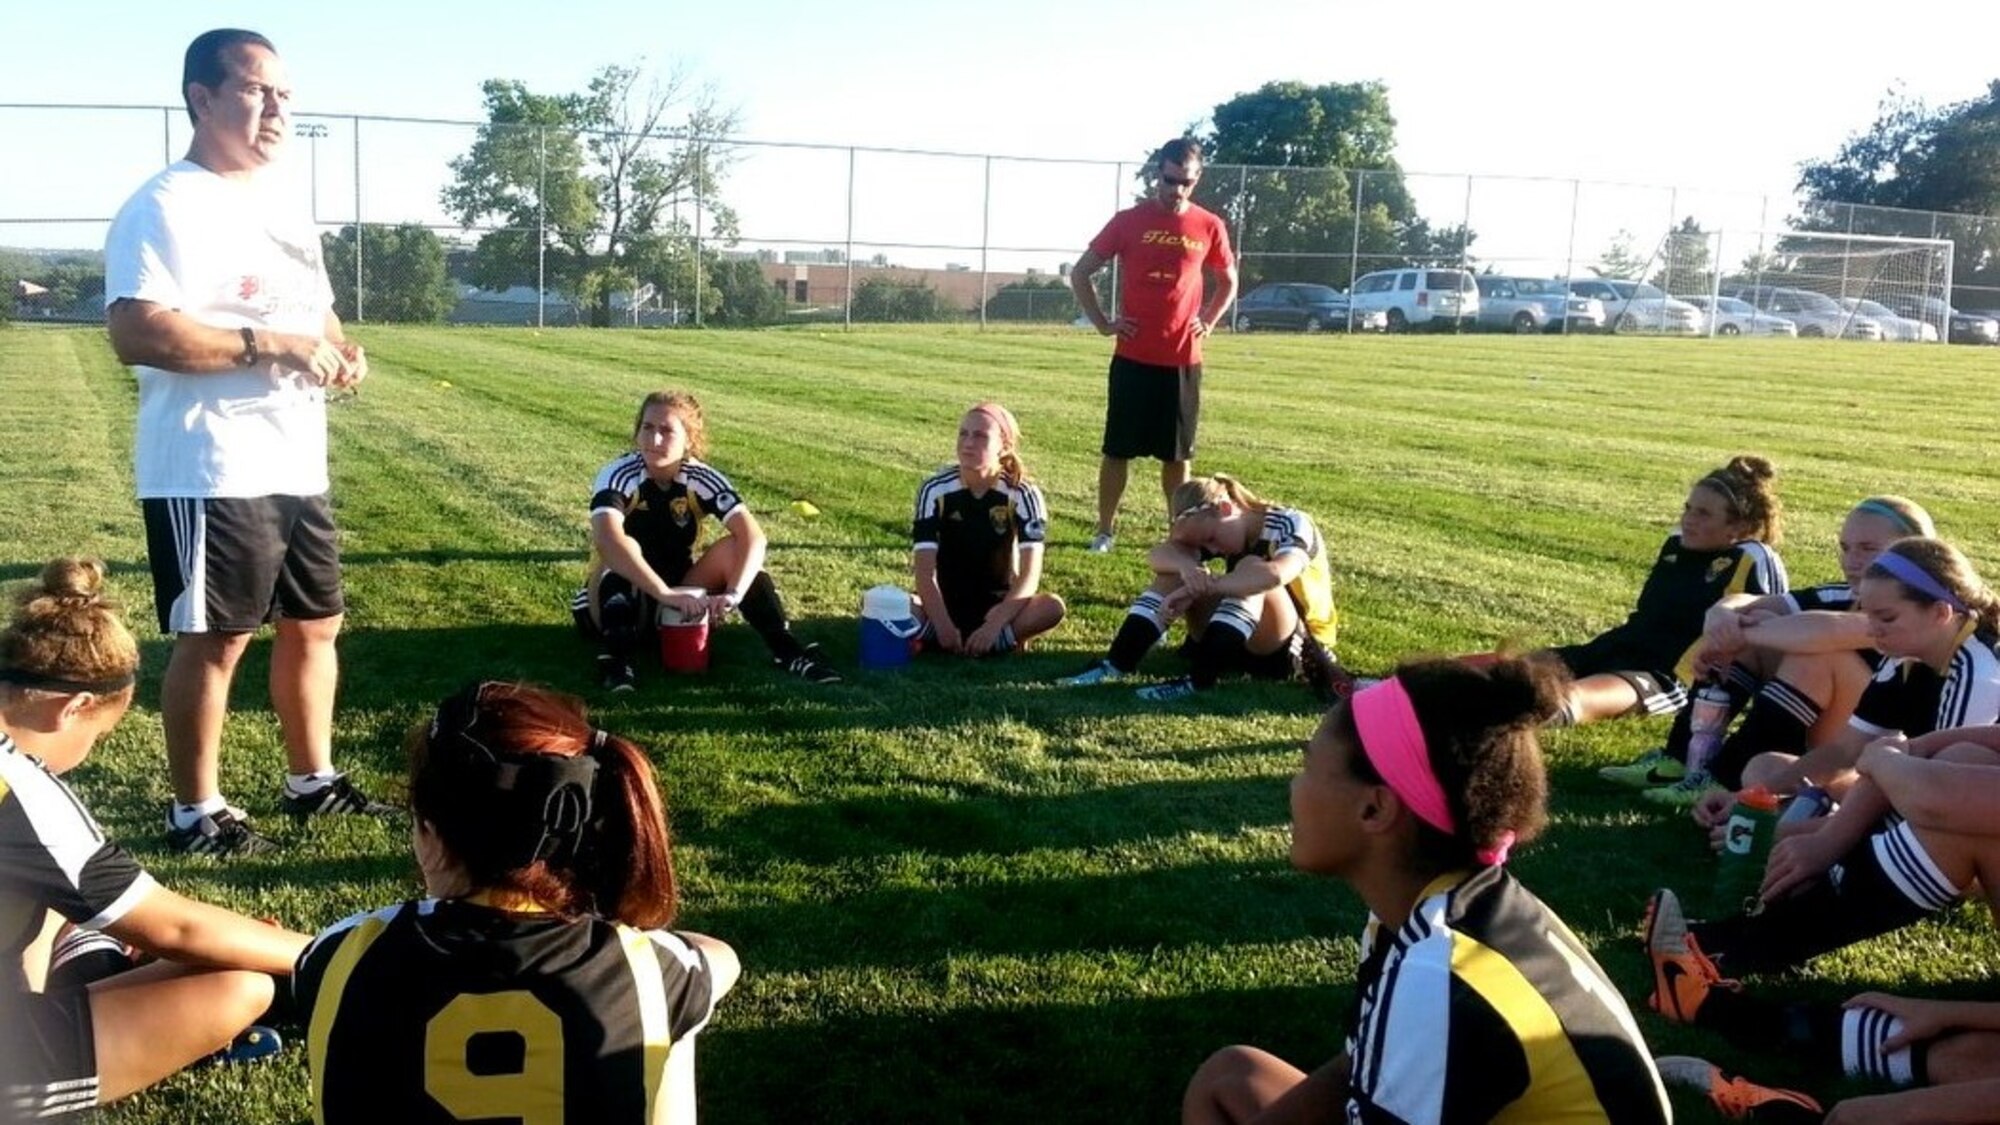 Retired U.S. Air Force Master Sgt. Richard Esparza, 55th Medical Group medical readiness manager, delivers a half-time speech to his under-15 girls premier team, Fiera, during a recent game. Esparza has been coaching soccer for nearly two decades. (U.S. Air Force courtesy photo)